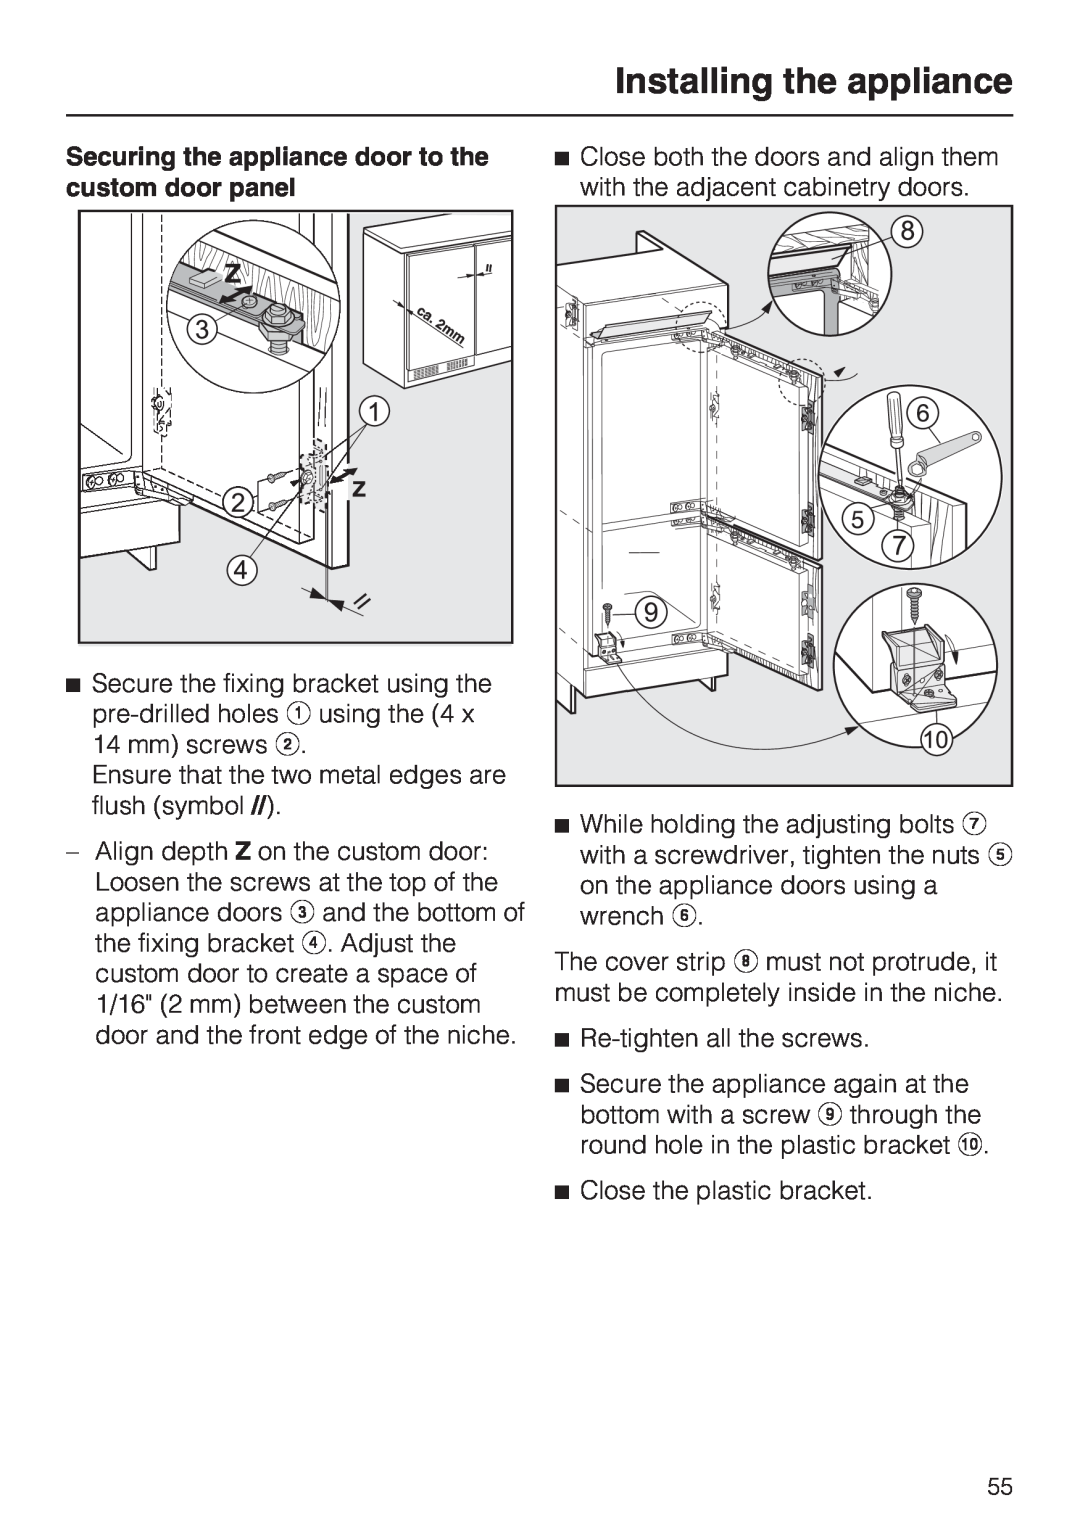 Miele KFN 9755 IDE installation instructions Installing the appliance, Ensure that the two metal edges are flush symbol 